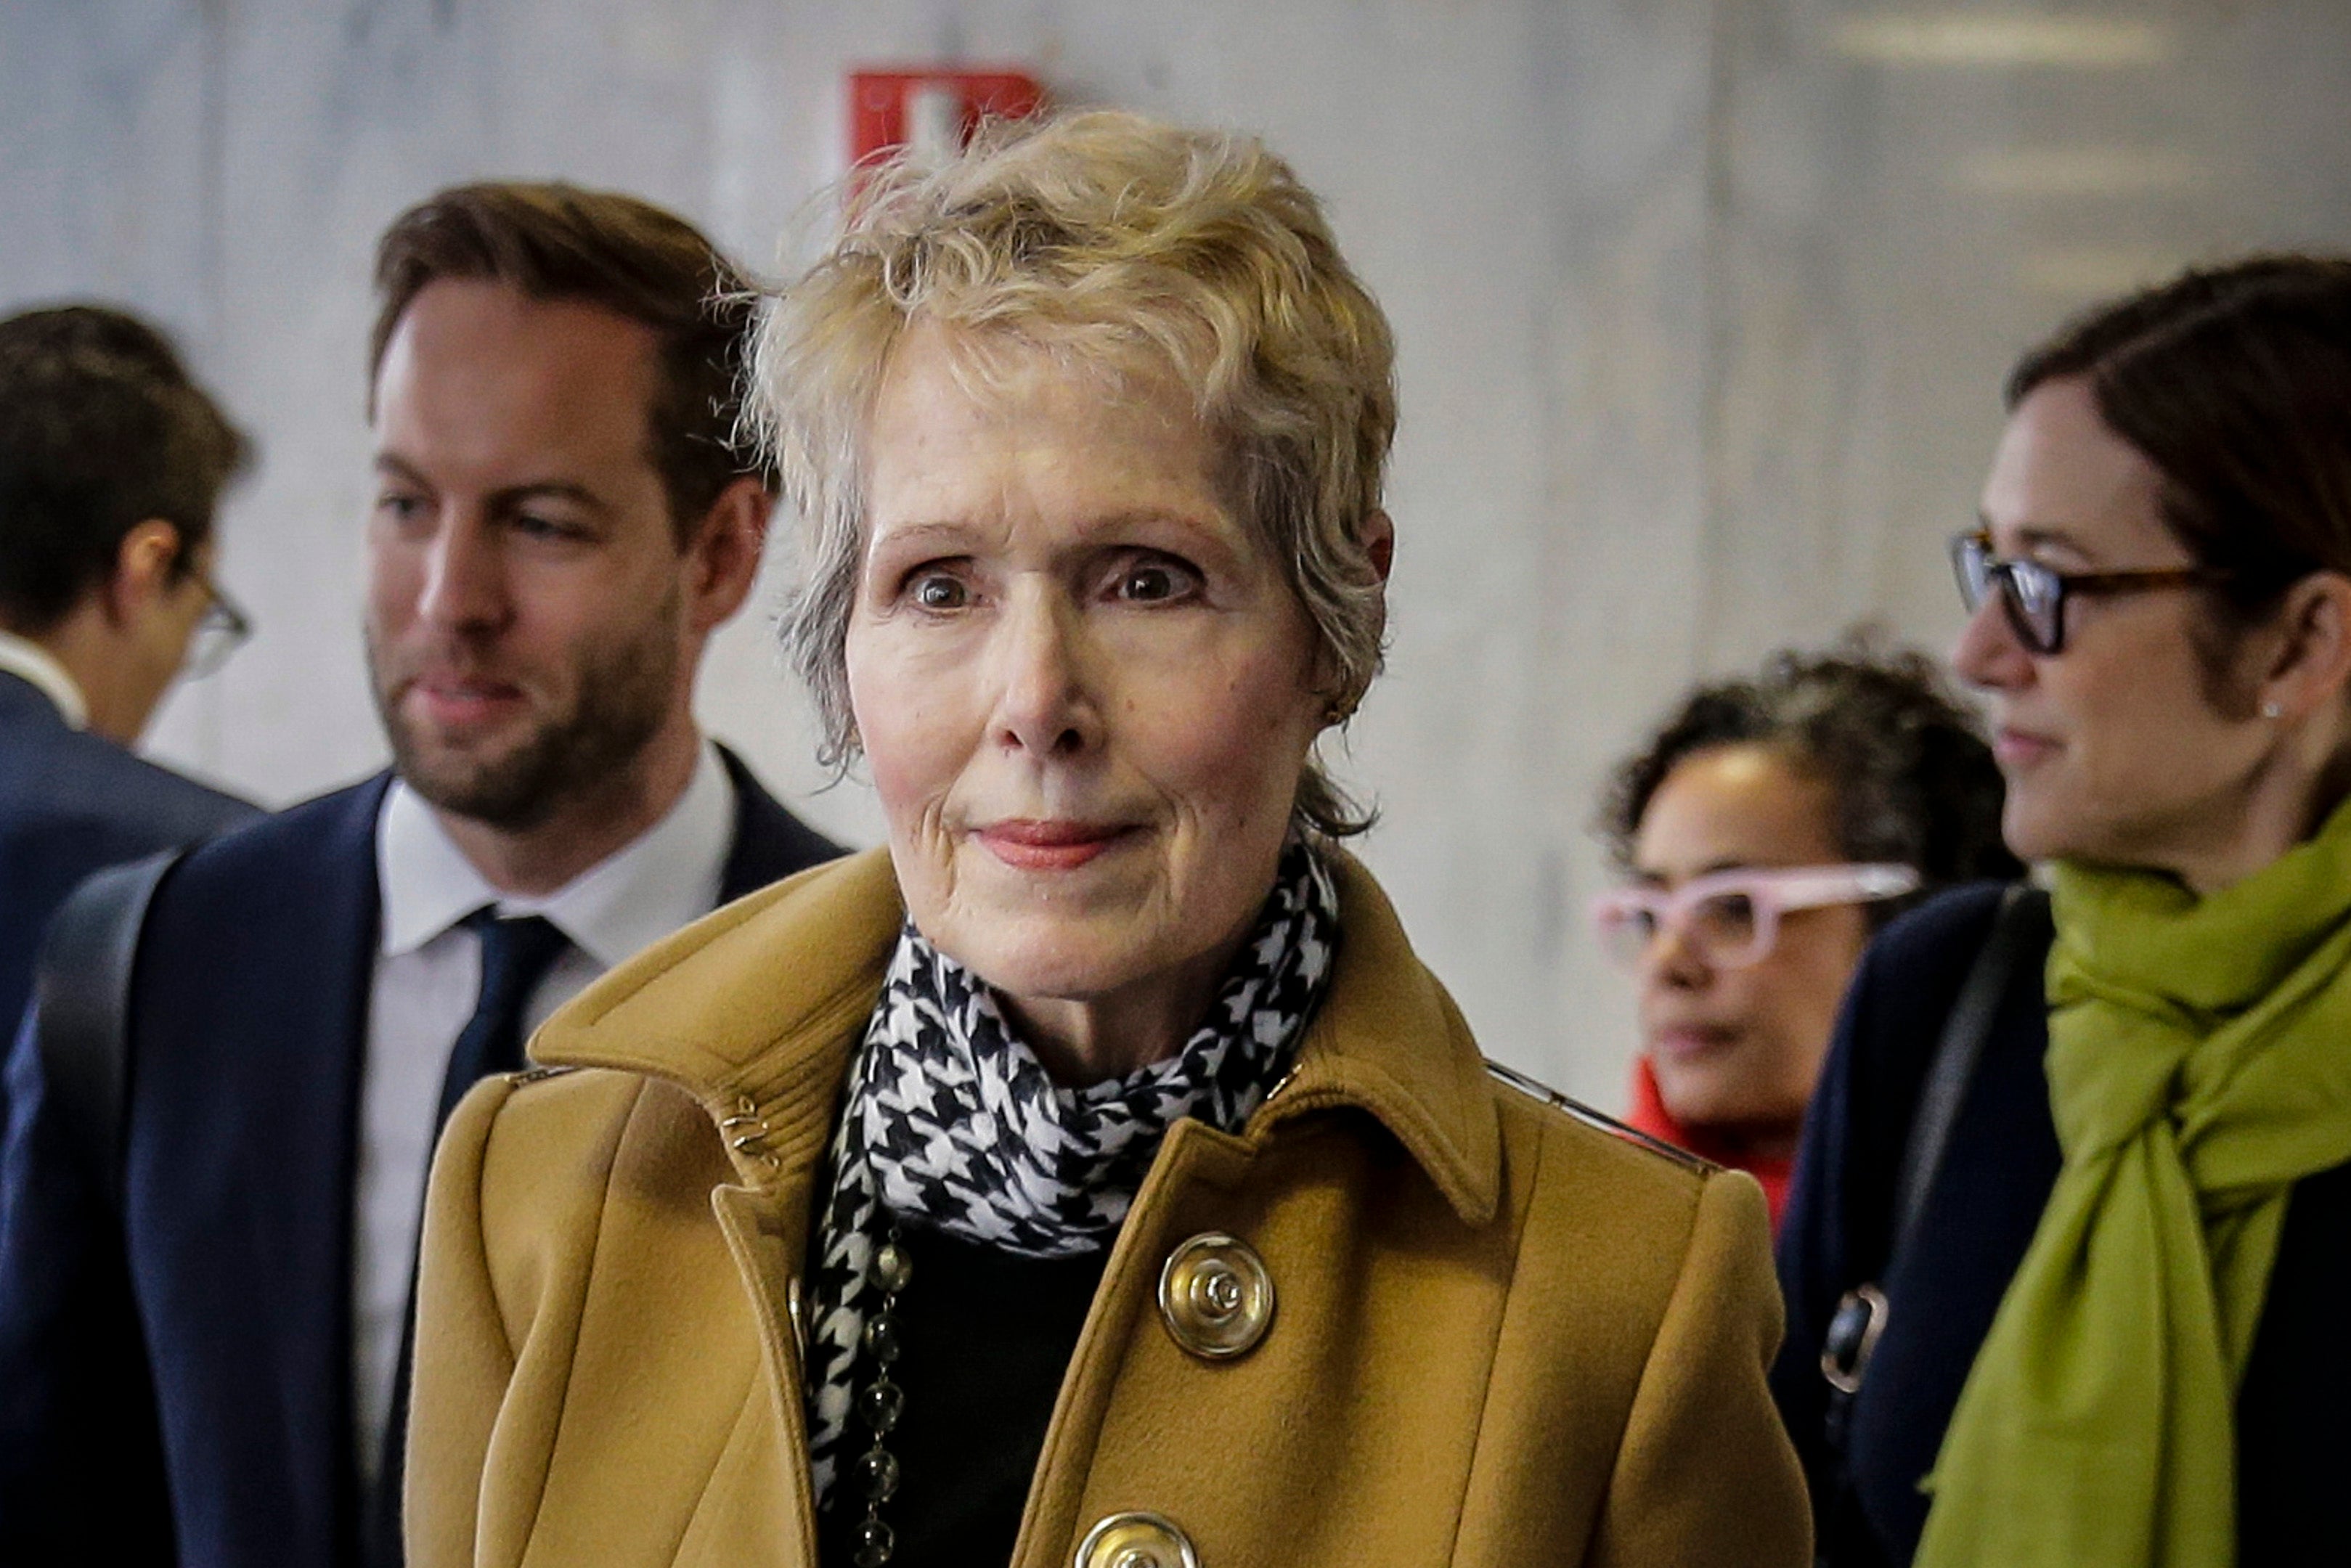 E Jean Carroll defamation suit is among a slew of pending legal woes for the former president